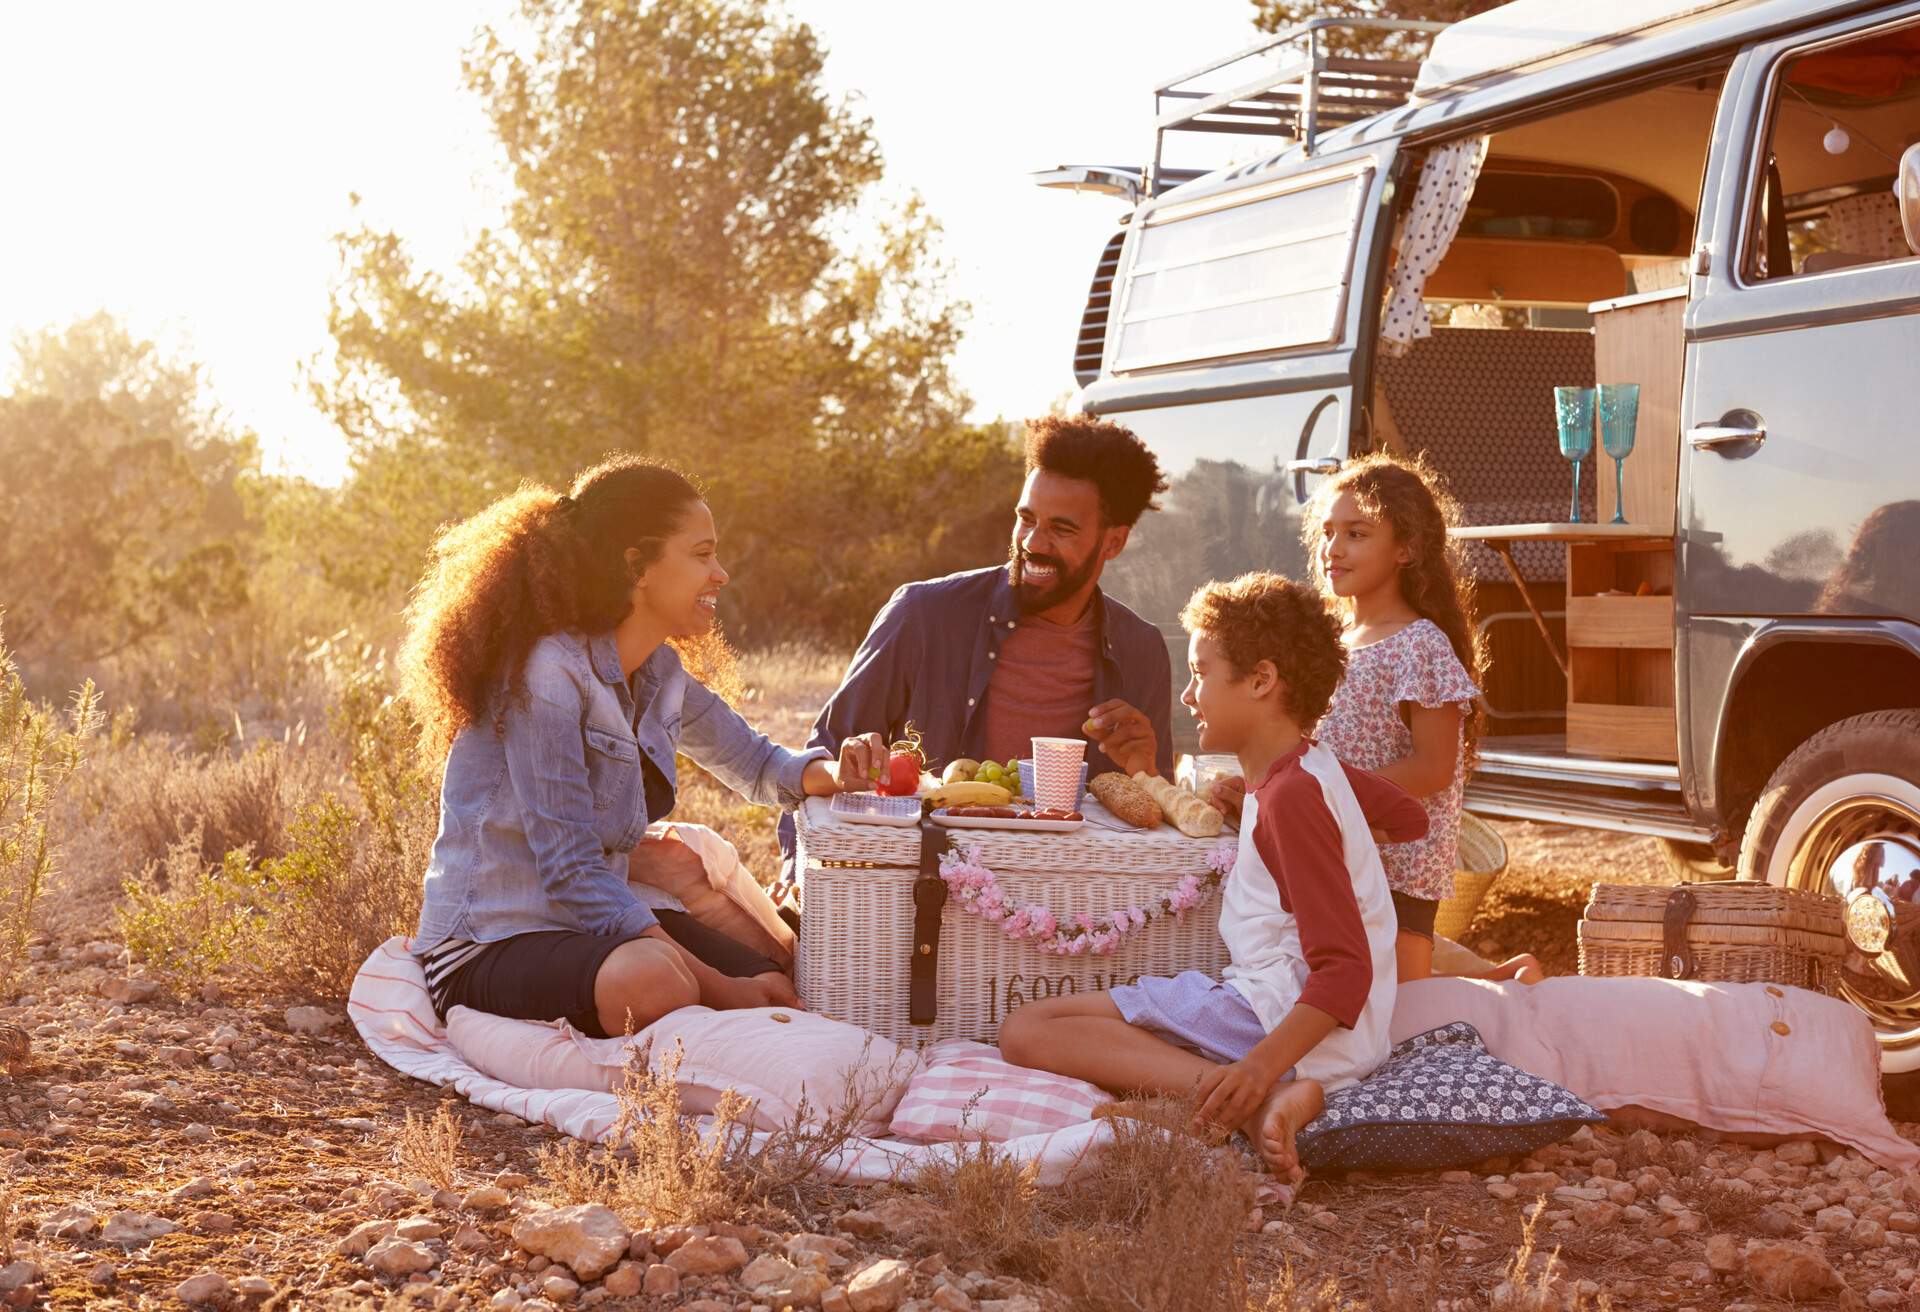 travel_adventure_vacation_family_camping_camper-van-outdoors